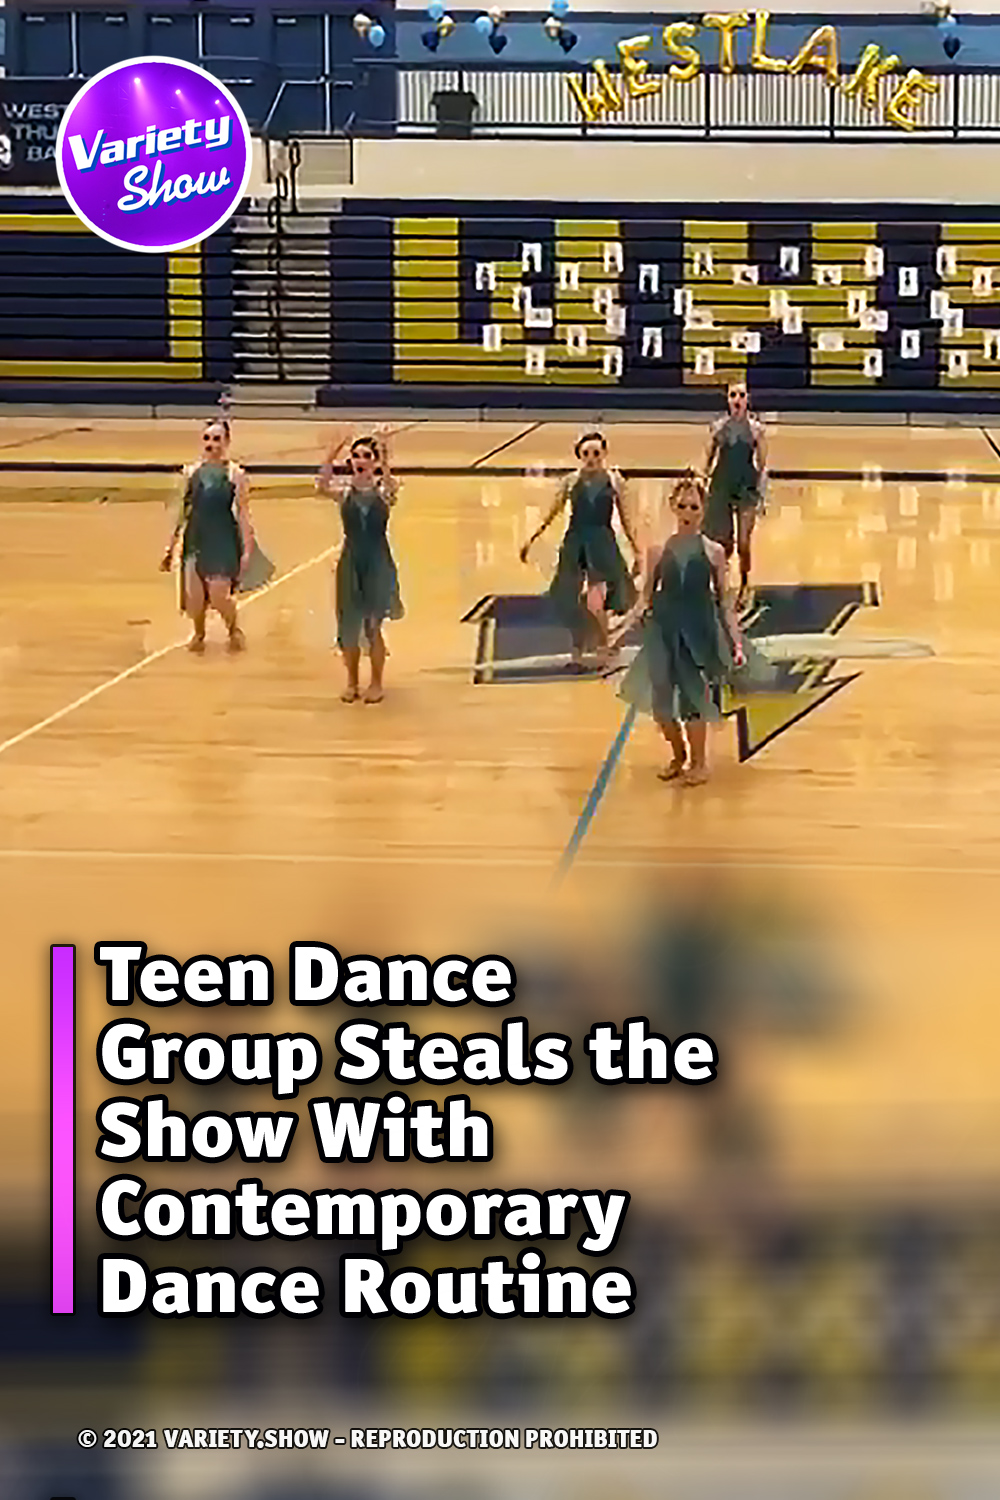 Teen Dance Group Steals the Show With Contemporary Dance Routine